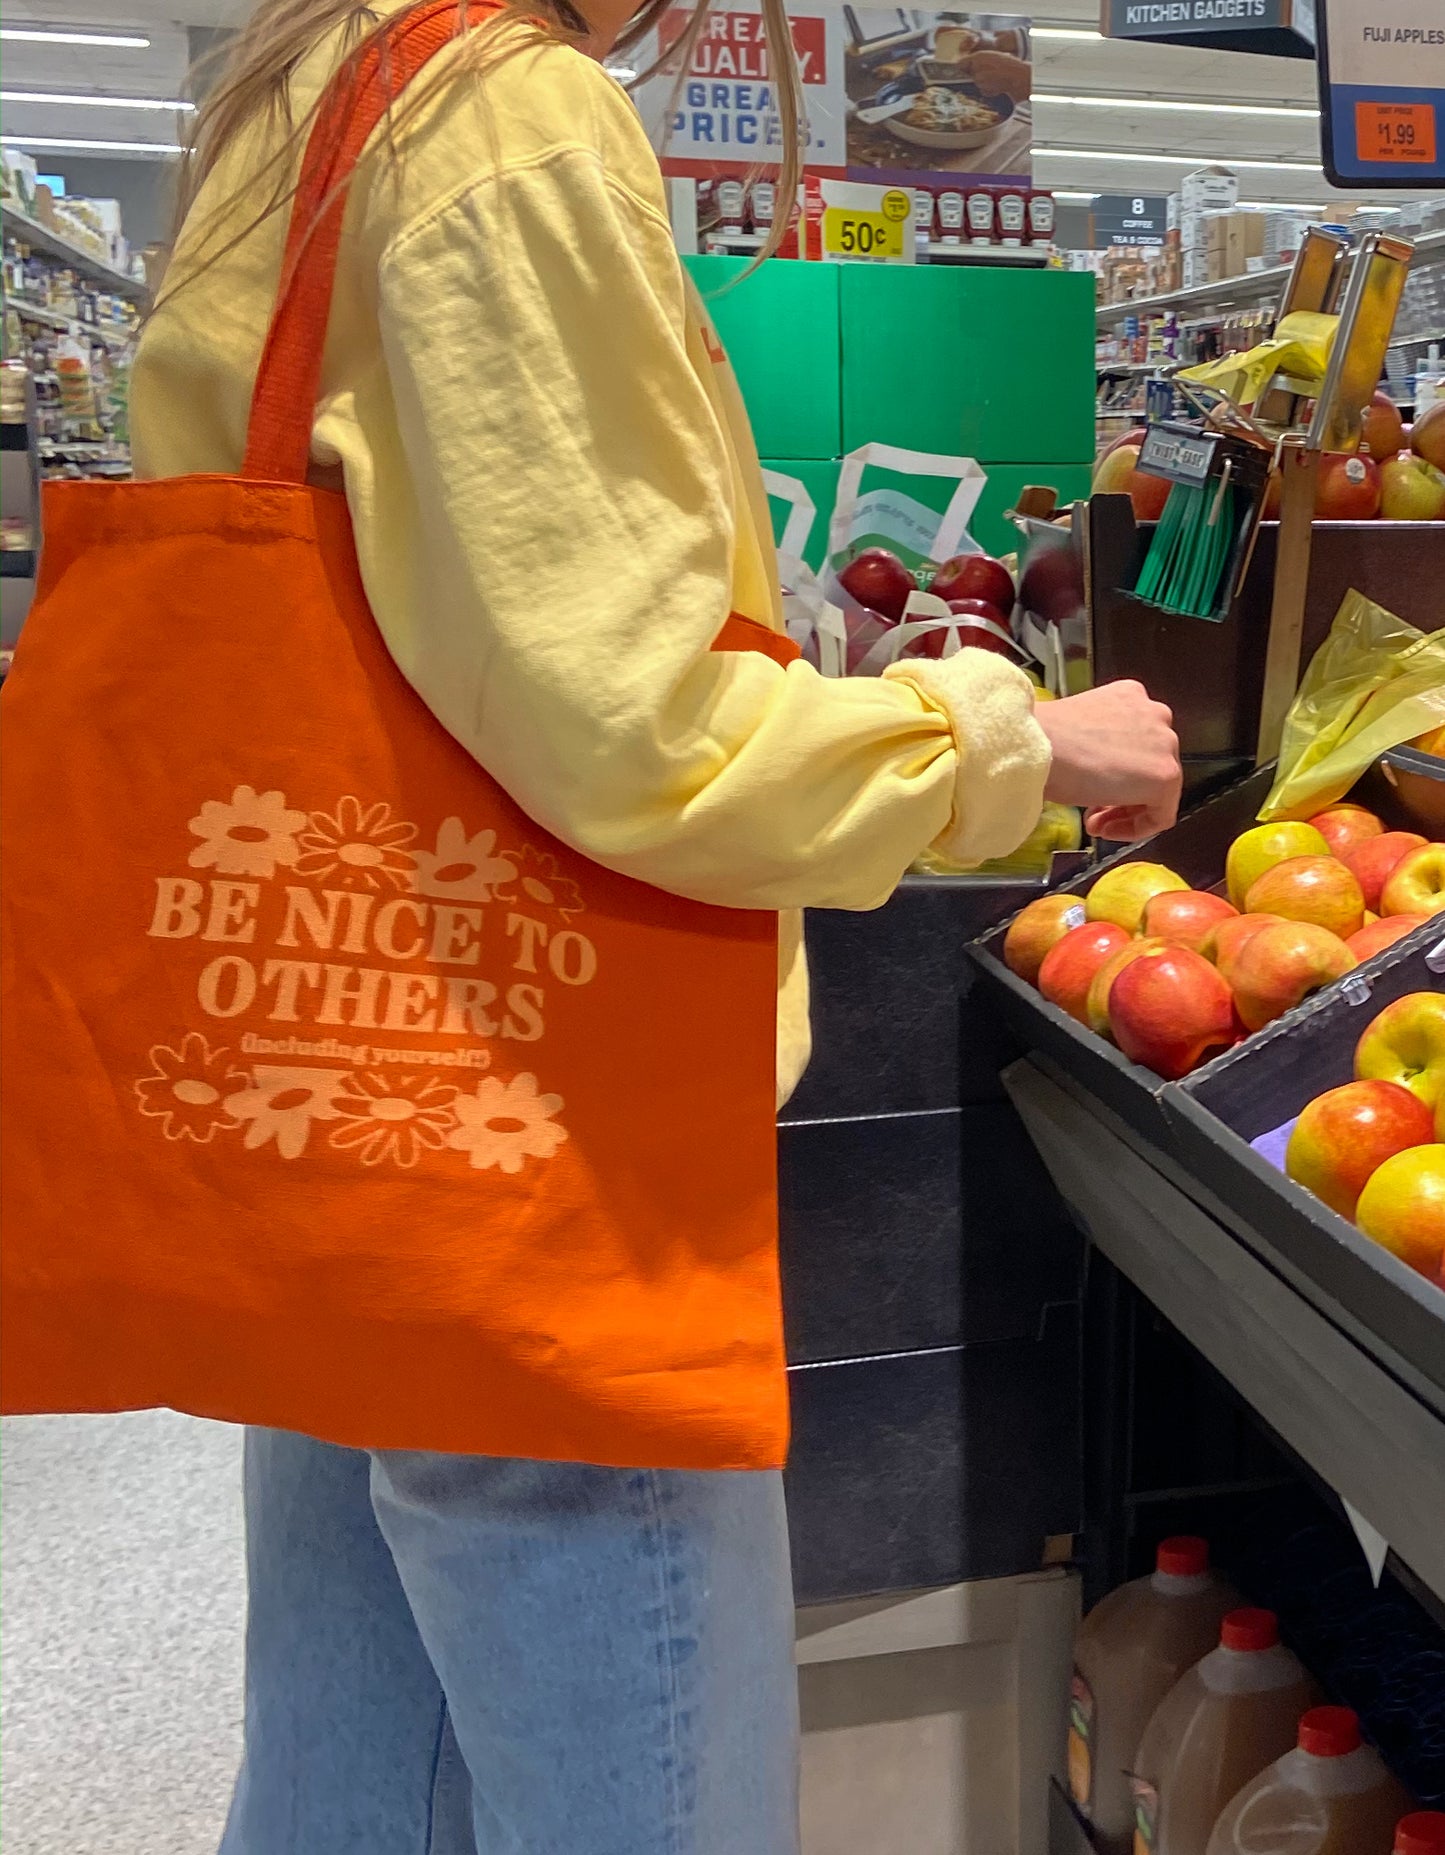 Nice to Others - Tote